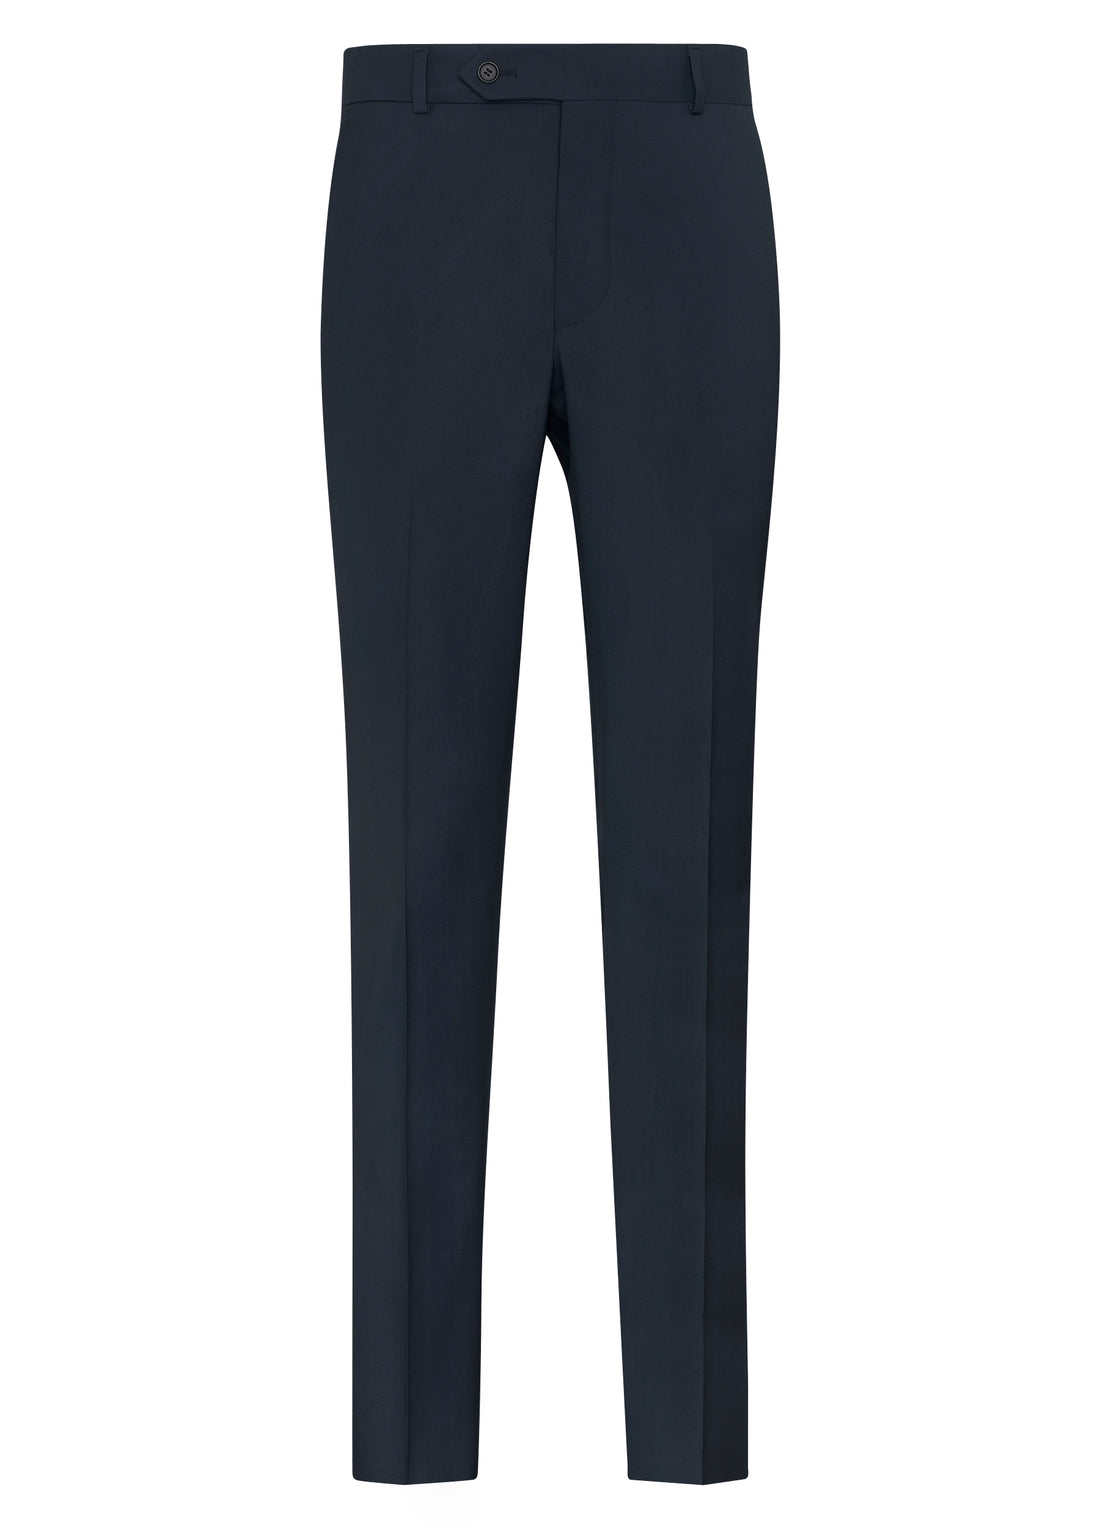 Navy Ice Wool Suit - Classic Fit Navy Ice Wool Suit - Classic Fit 